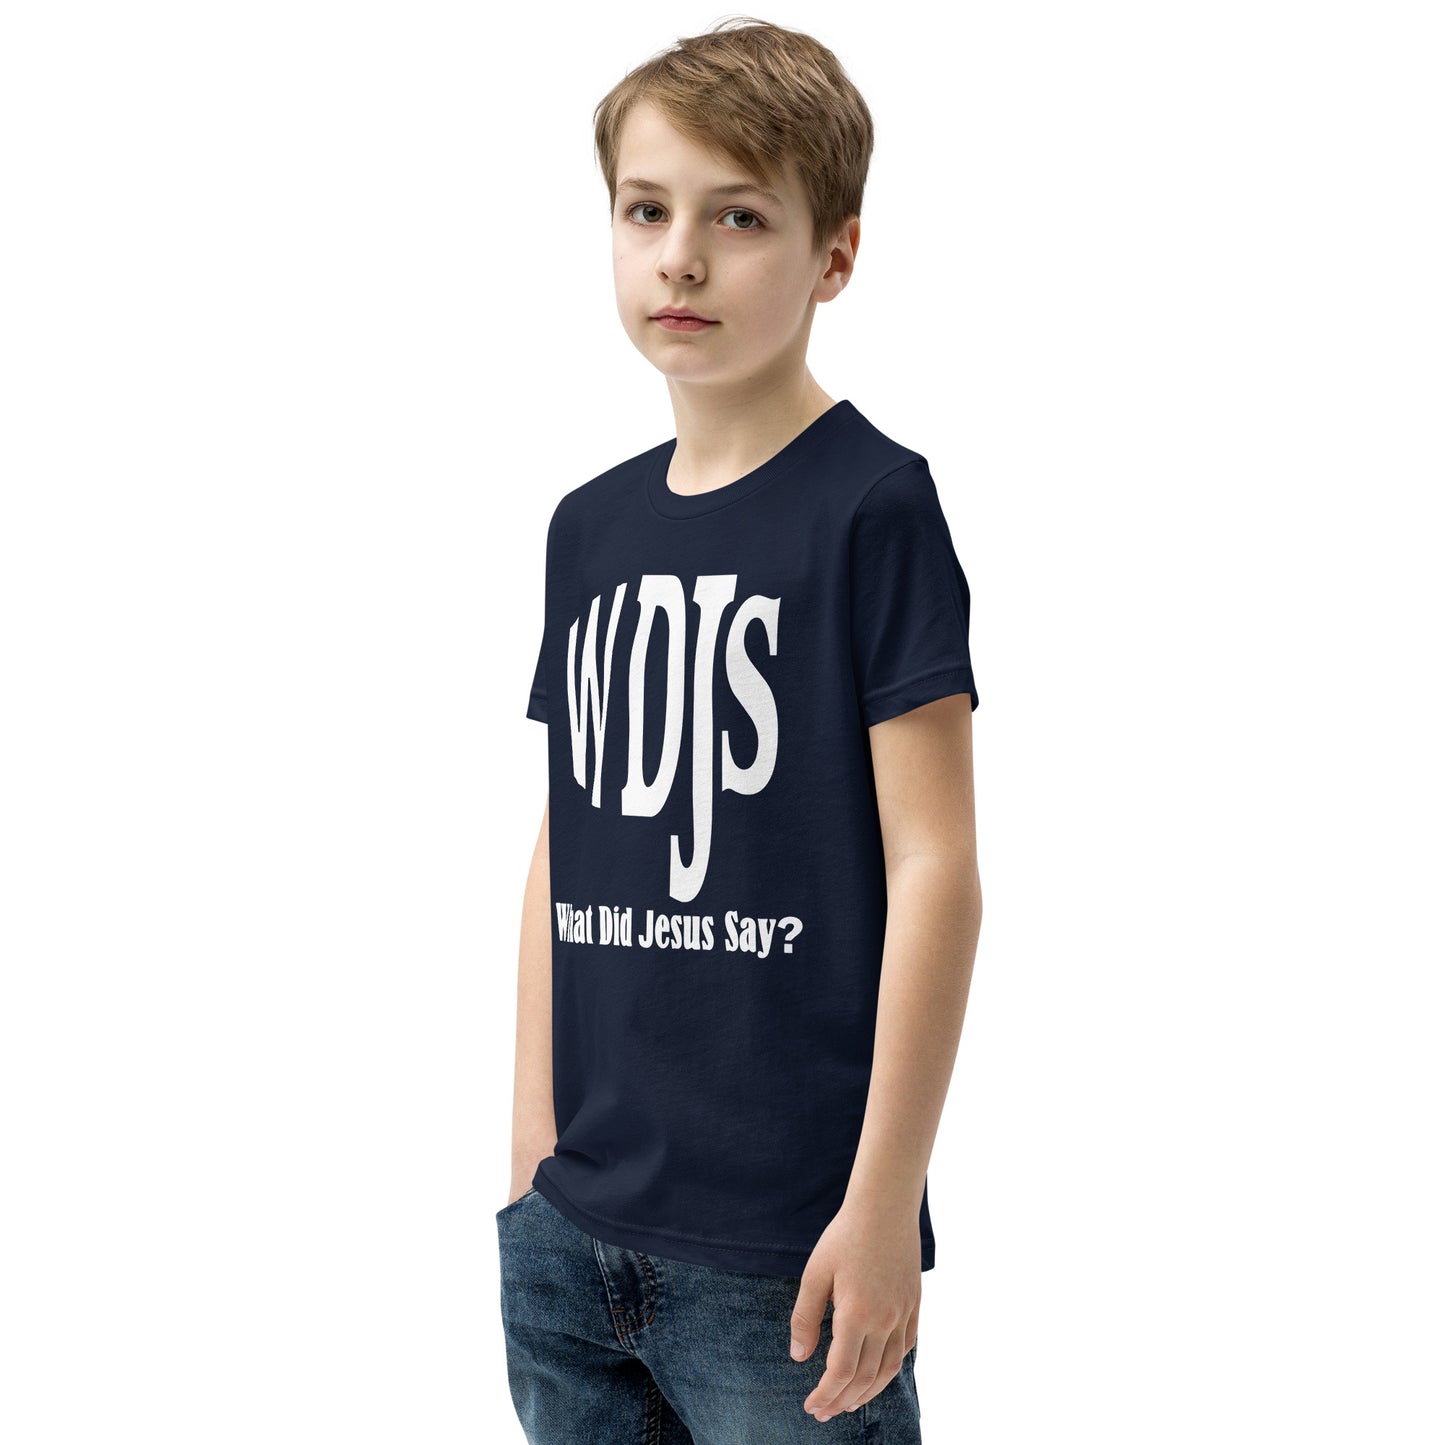 WDJS What Did Jesus Say Youth T-Shirt